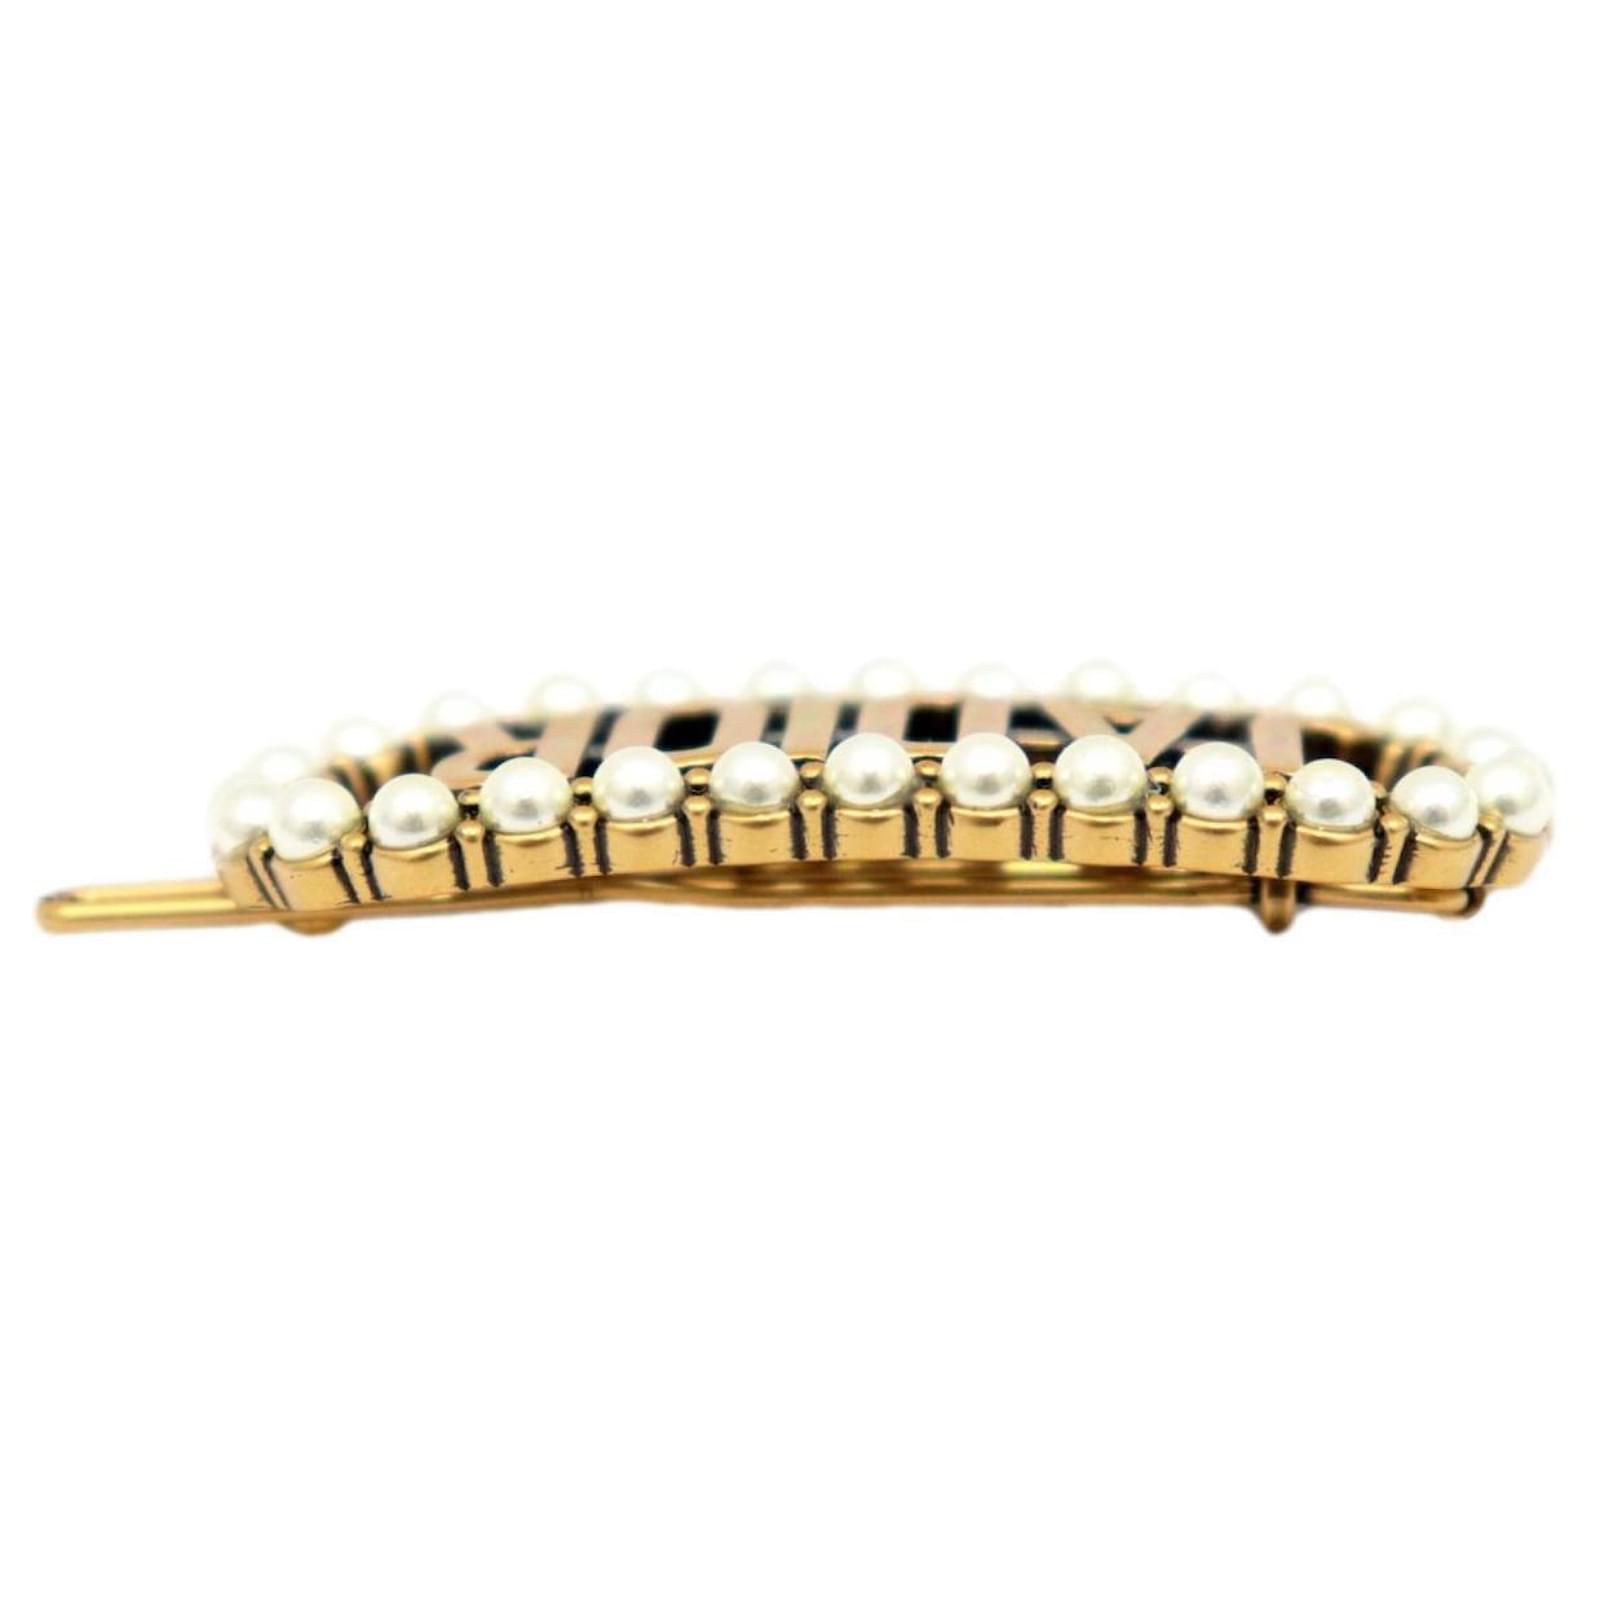 Christion Dior Gold-Finish Metal Cristals & White Pearl Hair Clip New $740